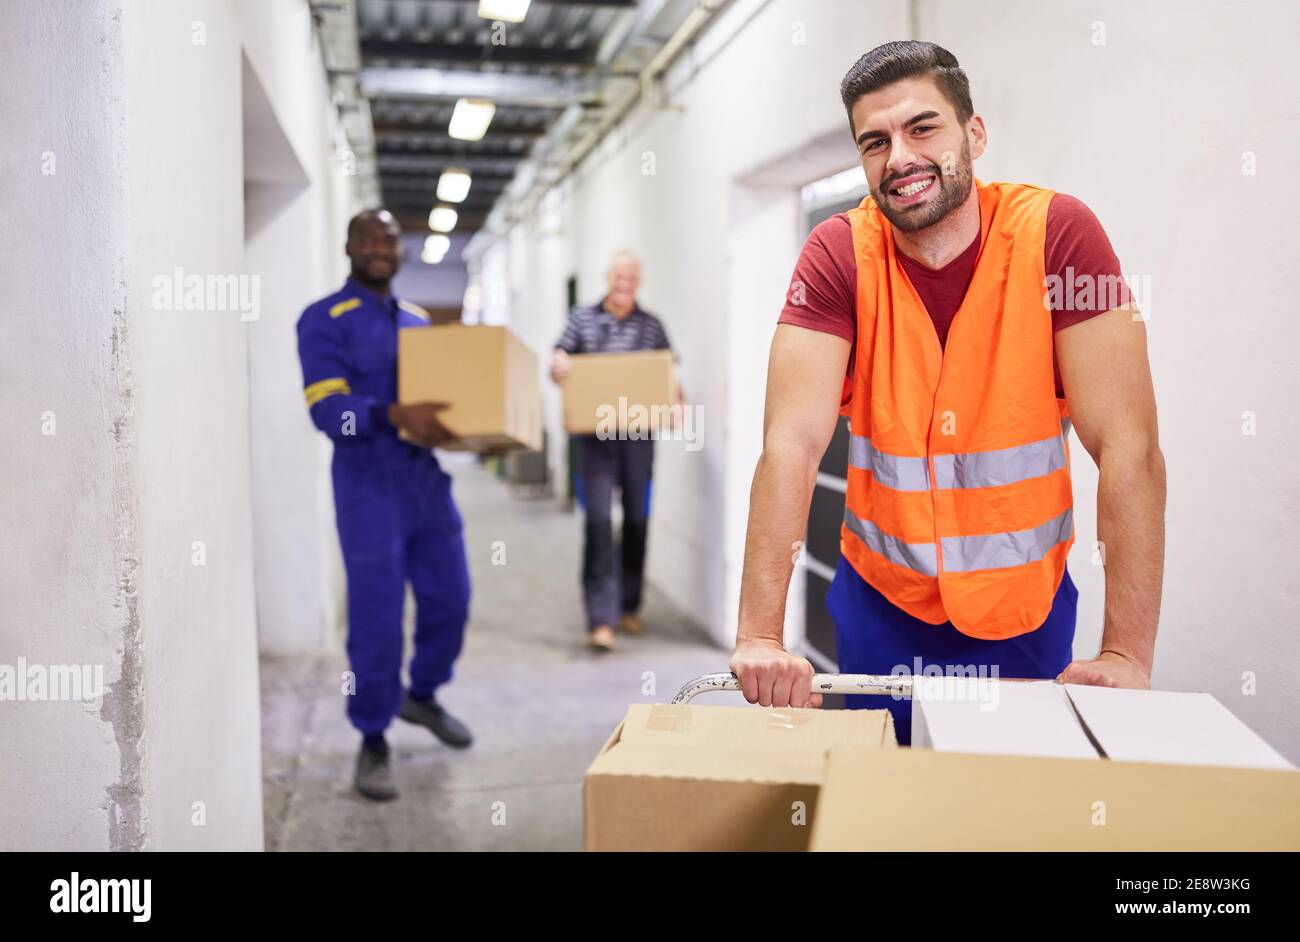 Smiling worker with safety vest pushes packages on push carts into the warehouse Stock Photo